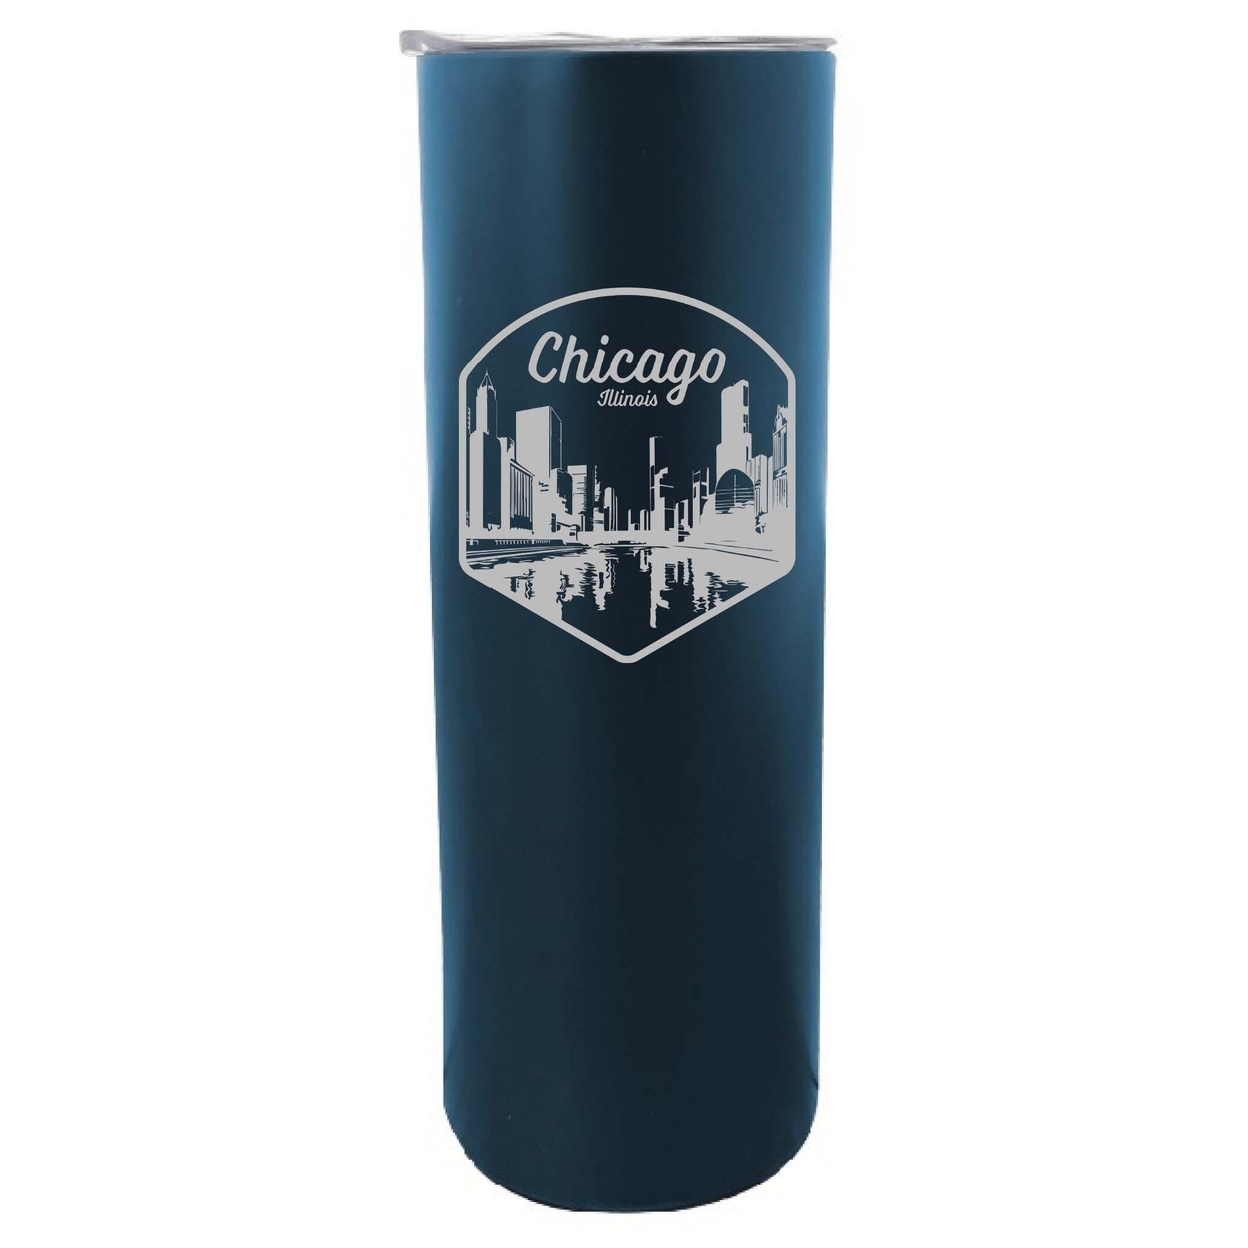 Chicago Illinois Souvenir 20 Oz Engraved Insulated Skinny Tumbler - Navy,,2-Pack